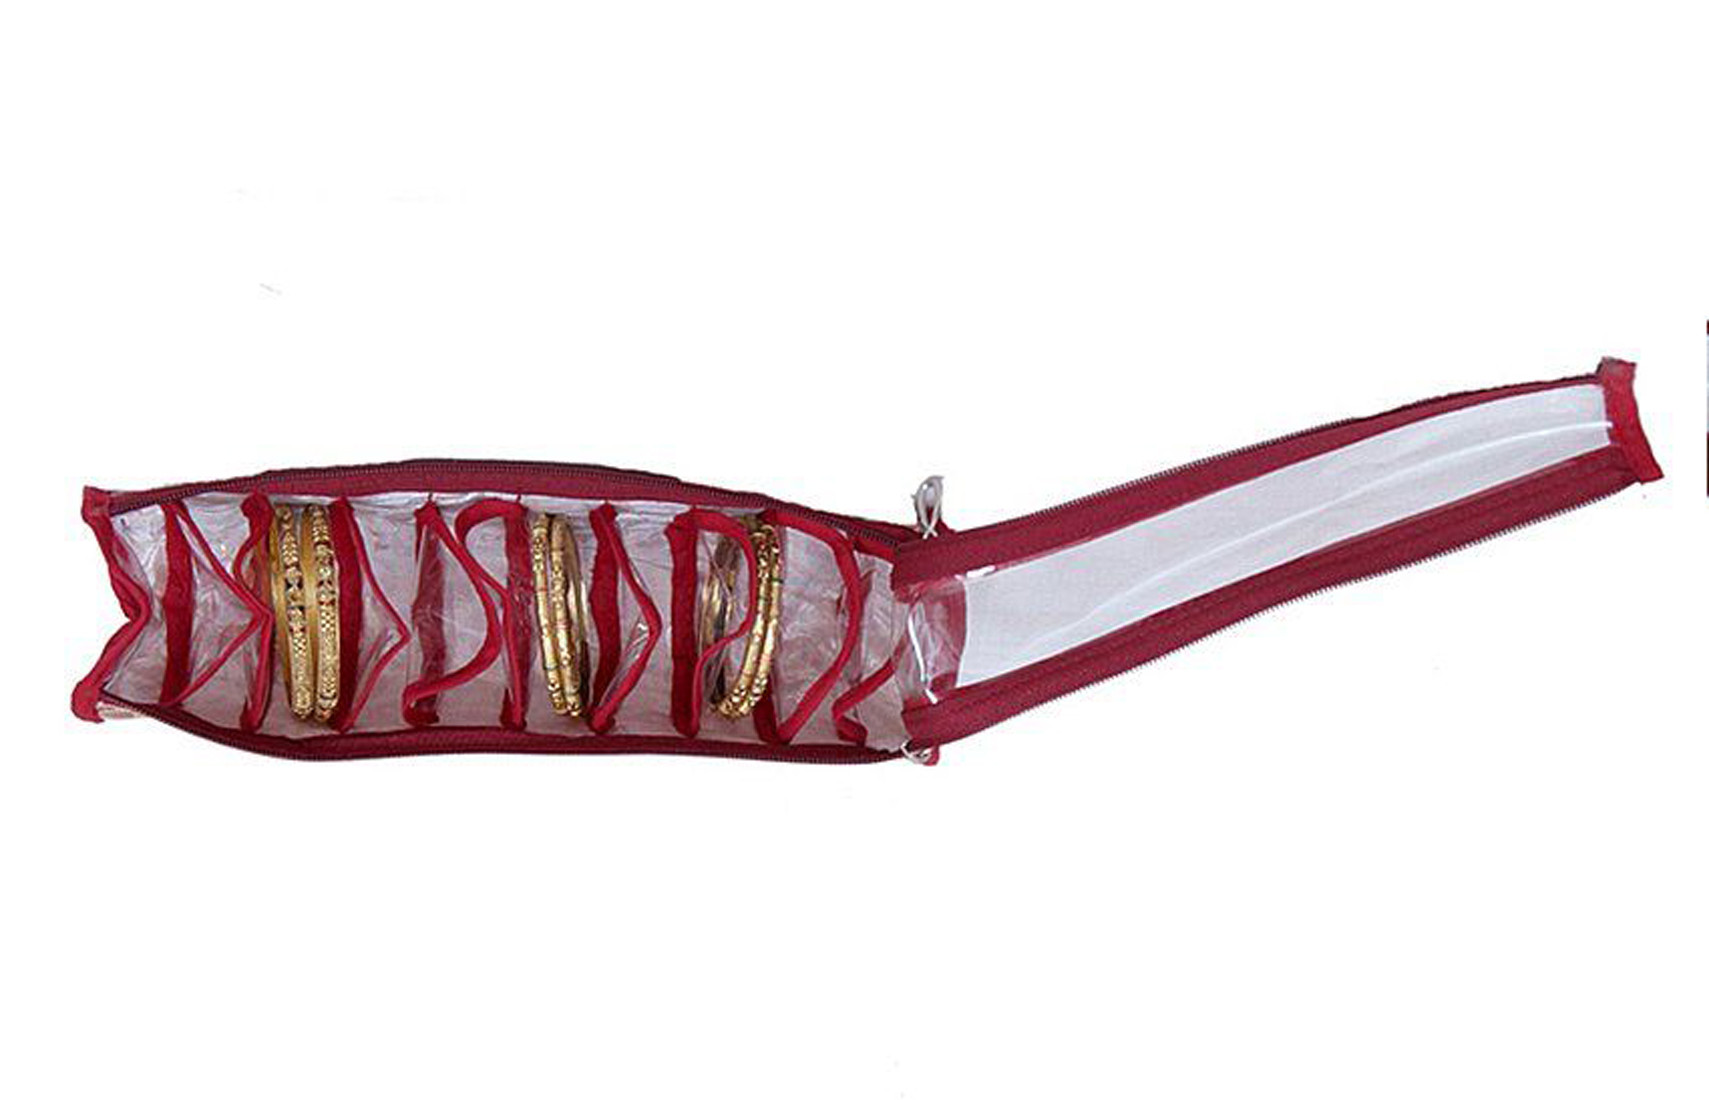 Kuber Industries Carry Design Laminated PVC Bangle Storage Pouch, Organizer For Travelling (Maroon)